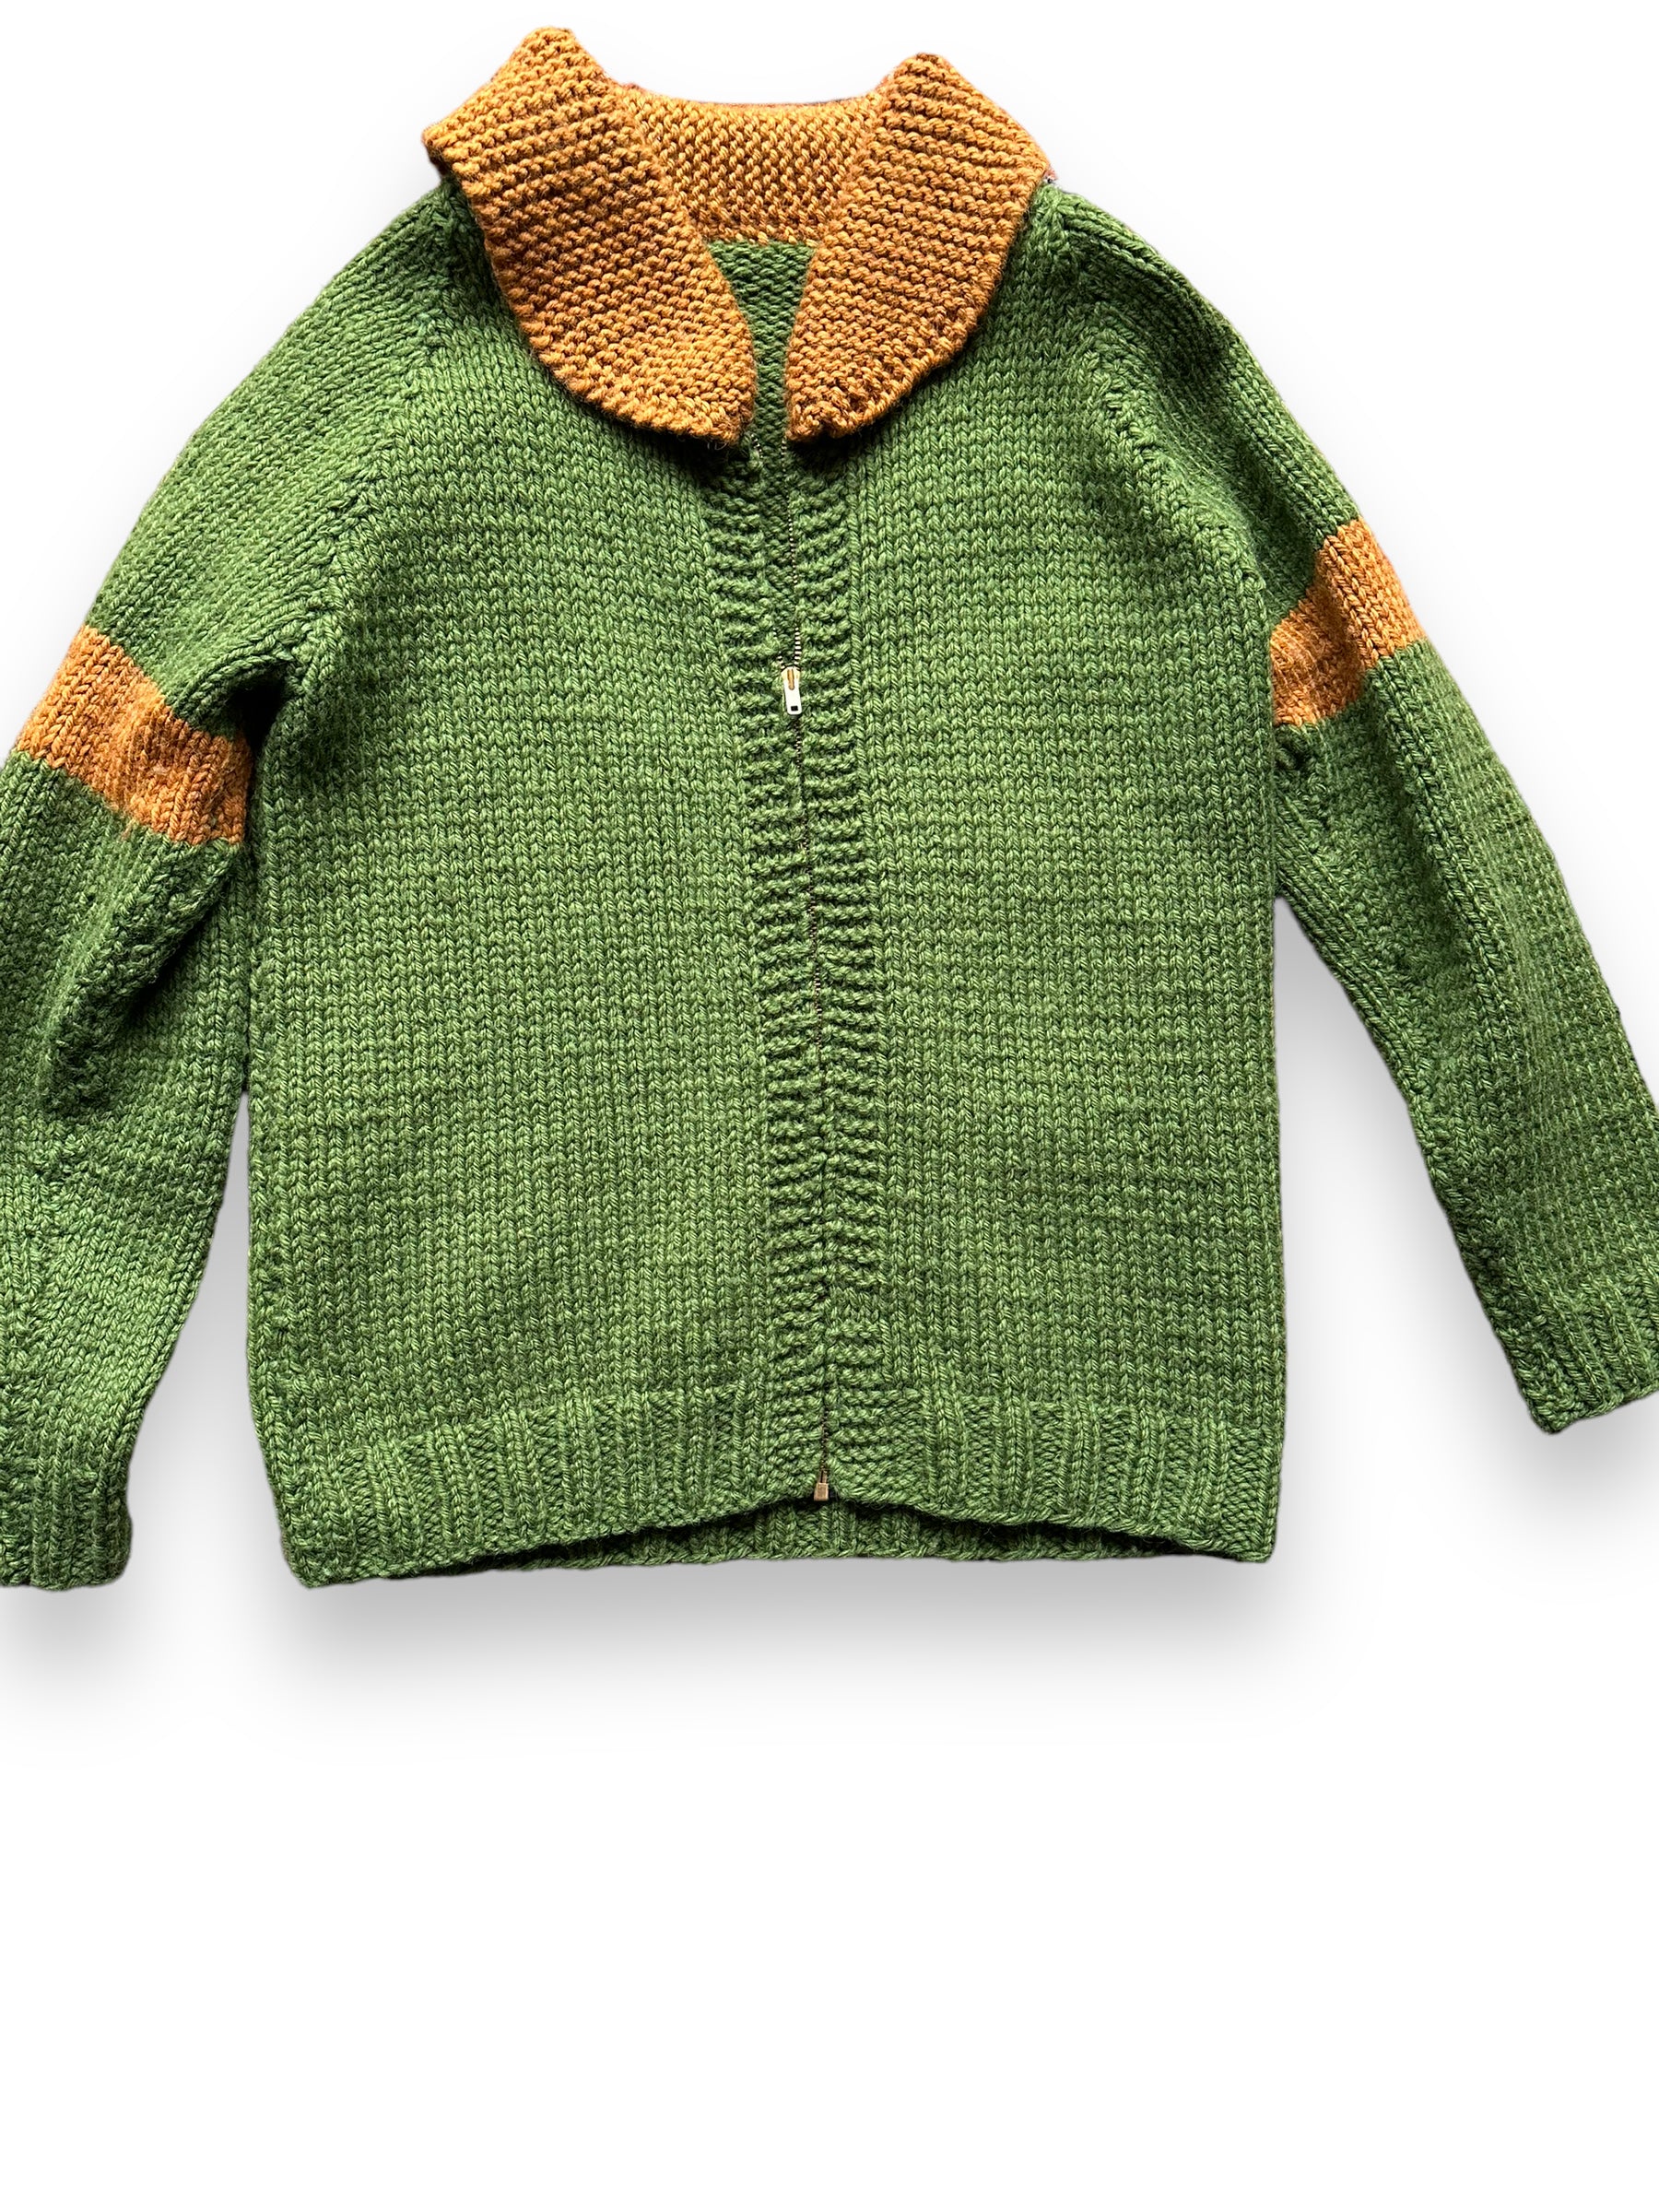 Front Detail on Vintage Green and Brown Striped Handknit Sweater SZ L | Vintage Wool Sweaters Seattle | Barn Owl Vintage Seattle